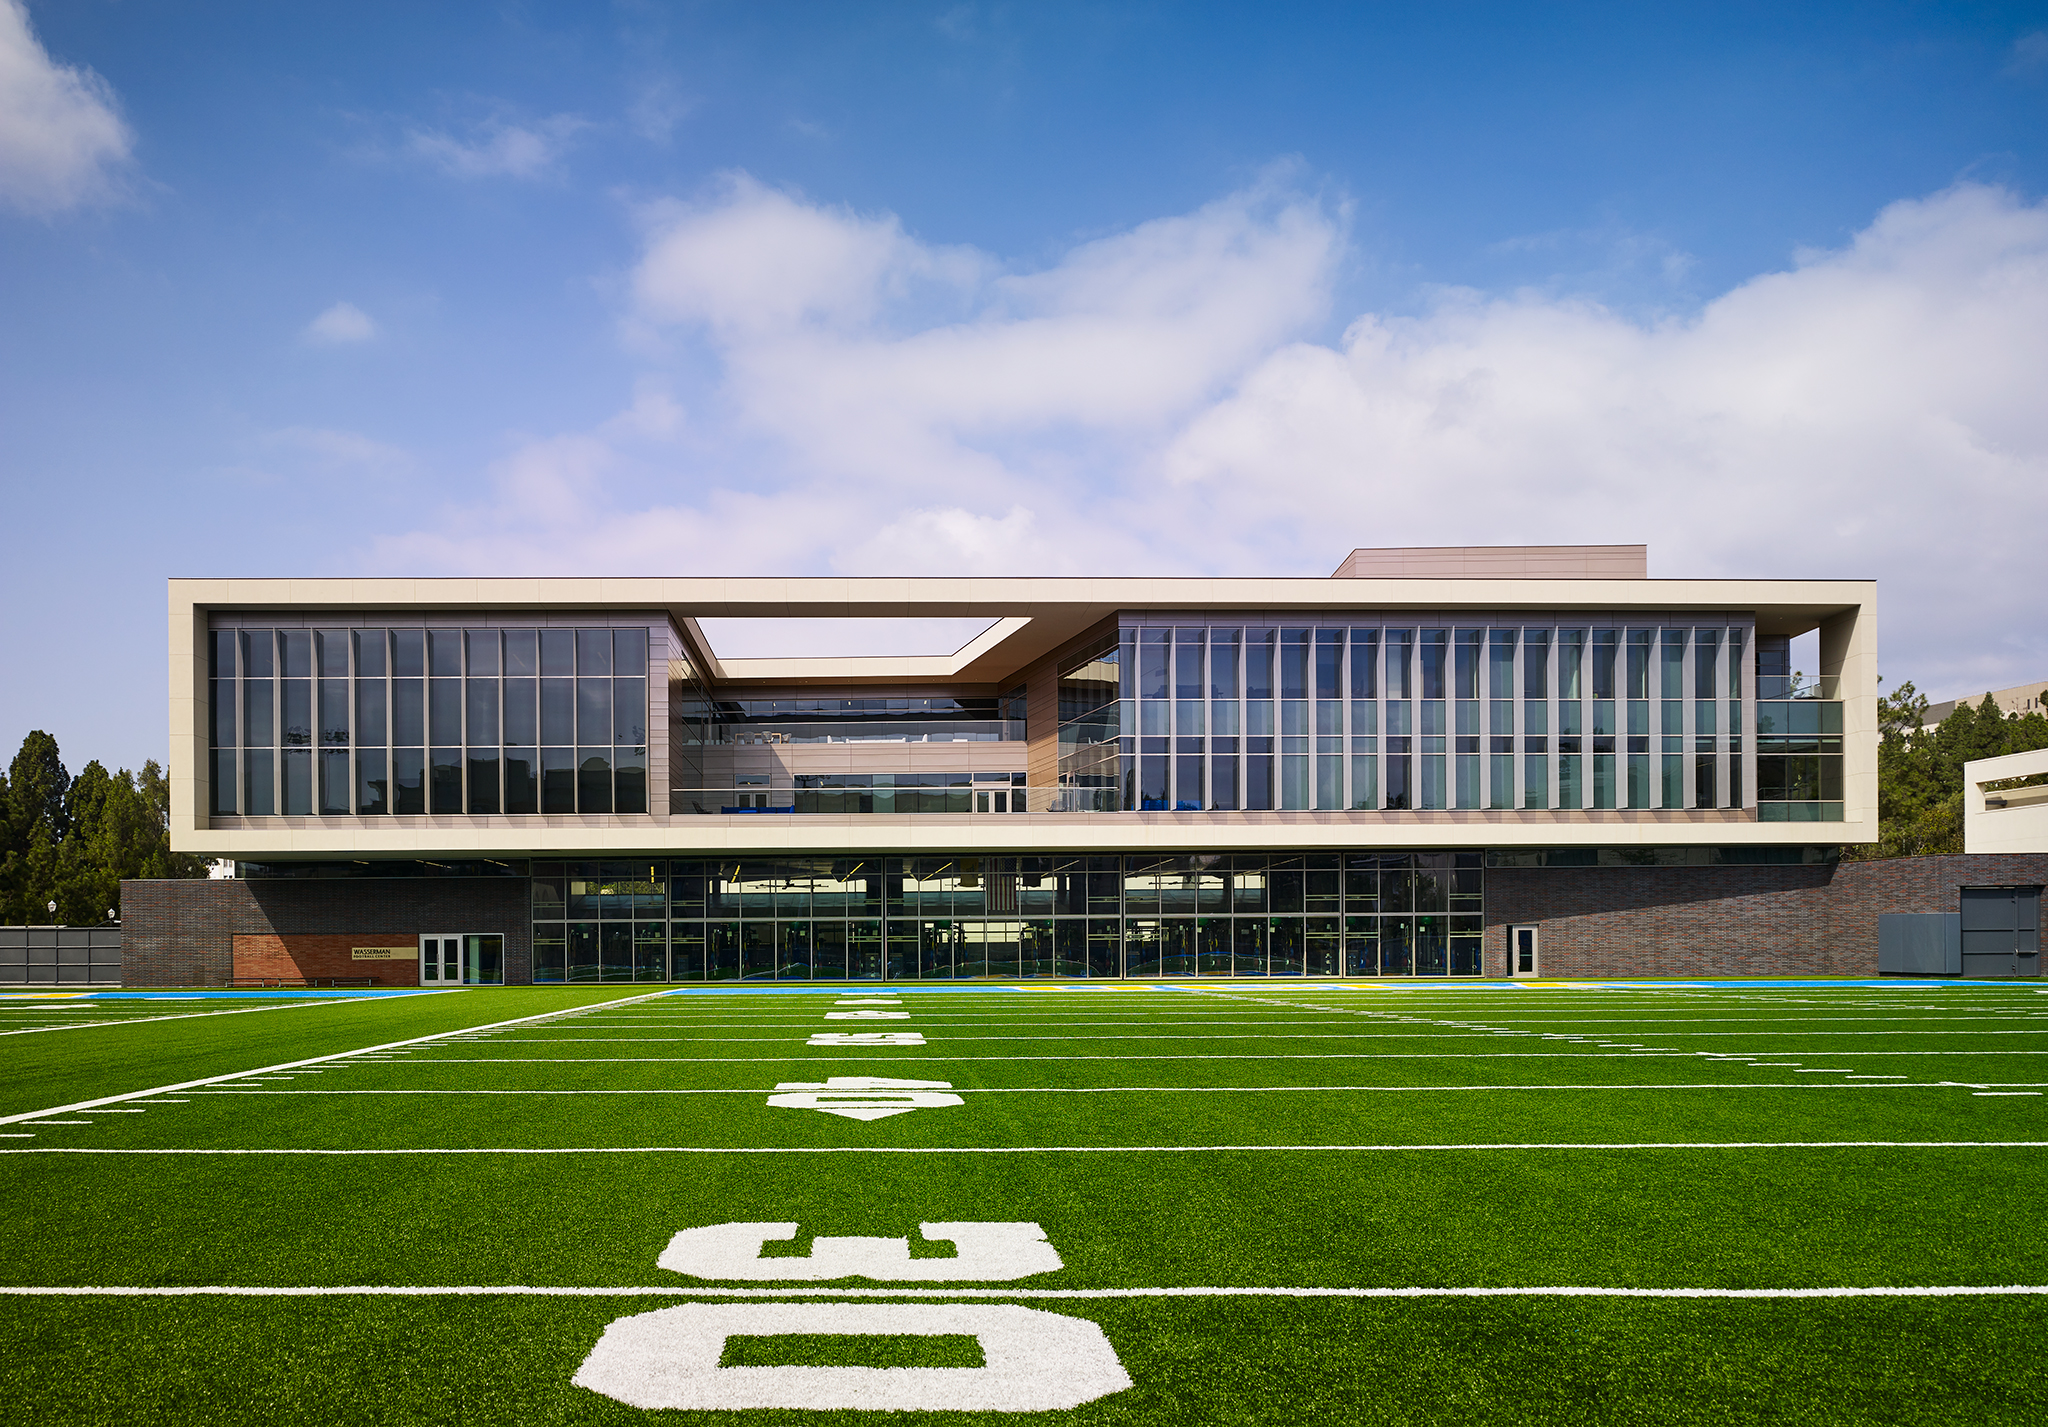  UCLA Wasserman Football Center  ZGF Architects  Los Angeles, CA     View Full Project  